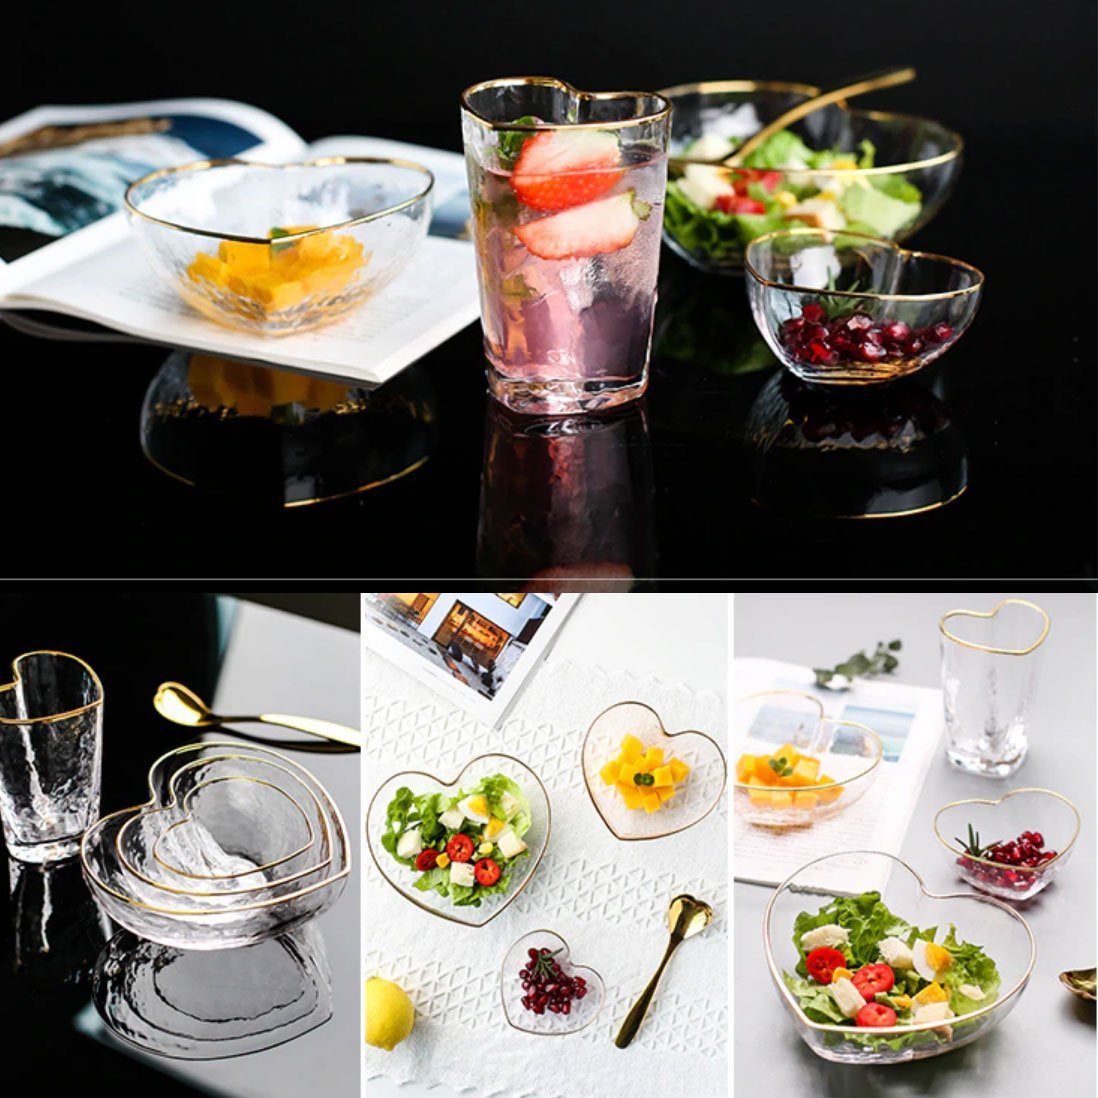 Heart Glass Tableware with Gold Rim - Nordic Side - 